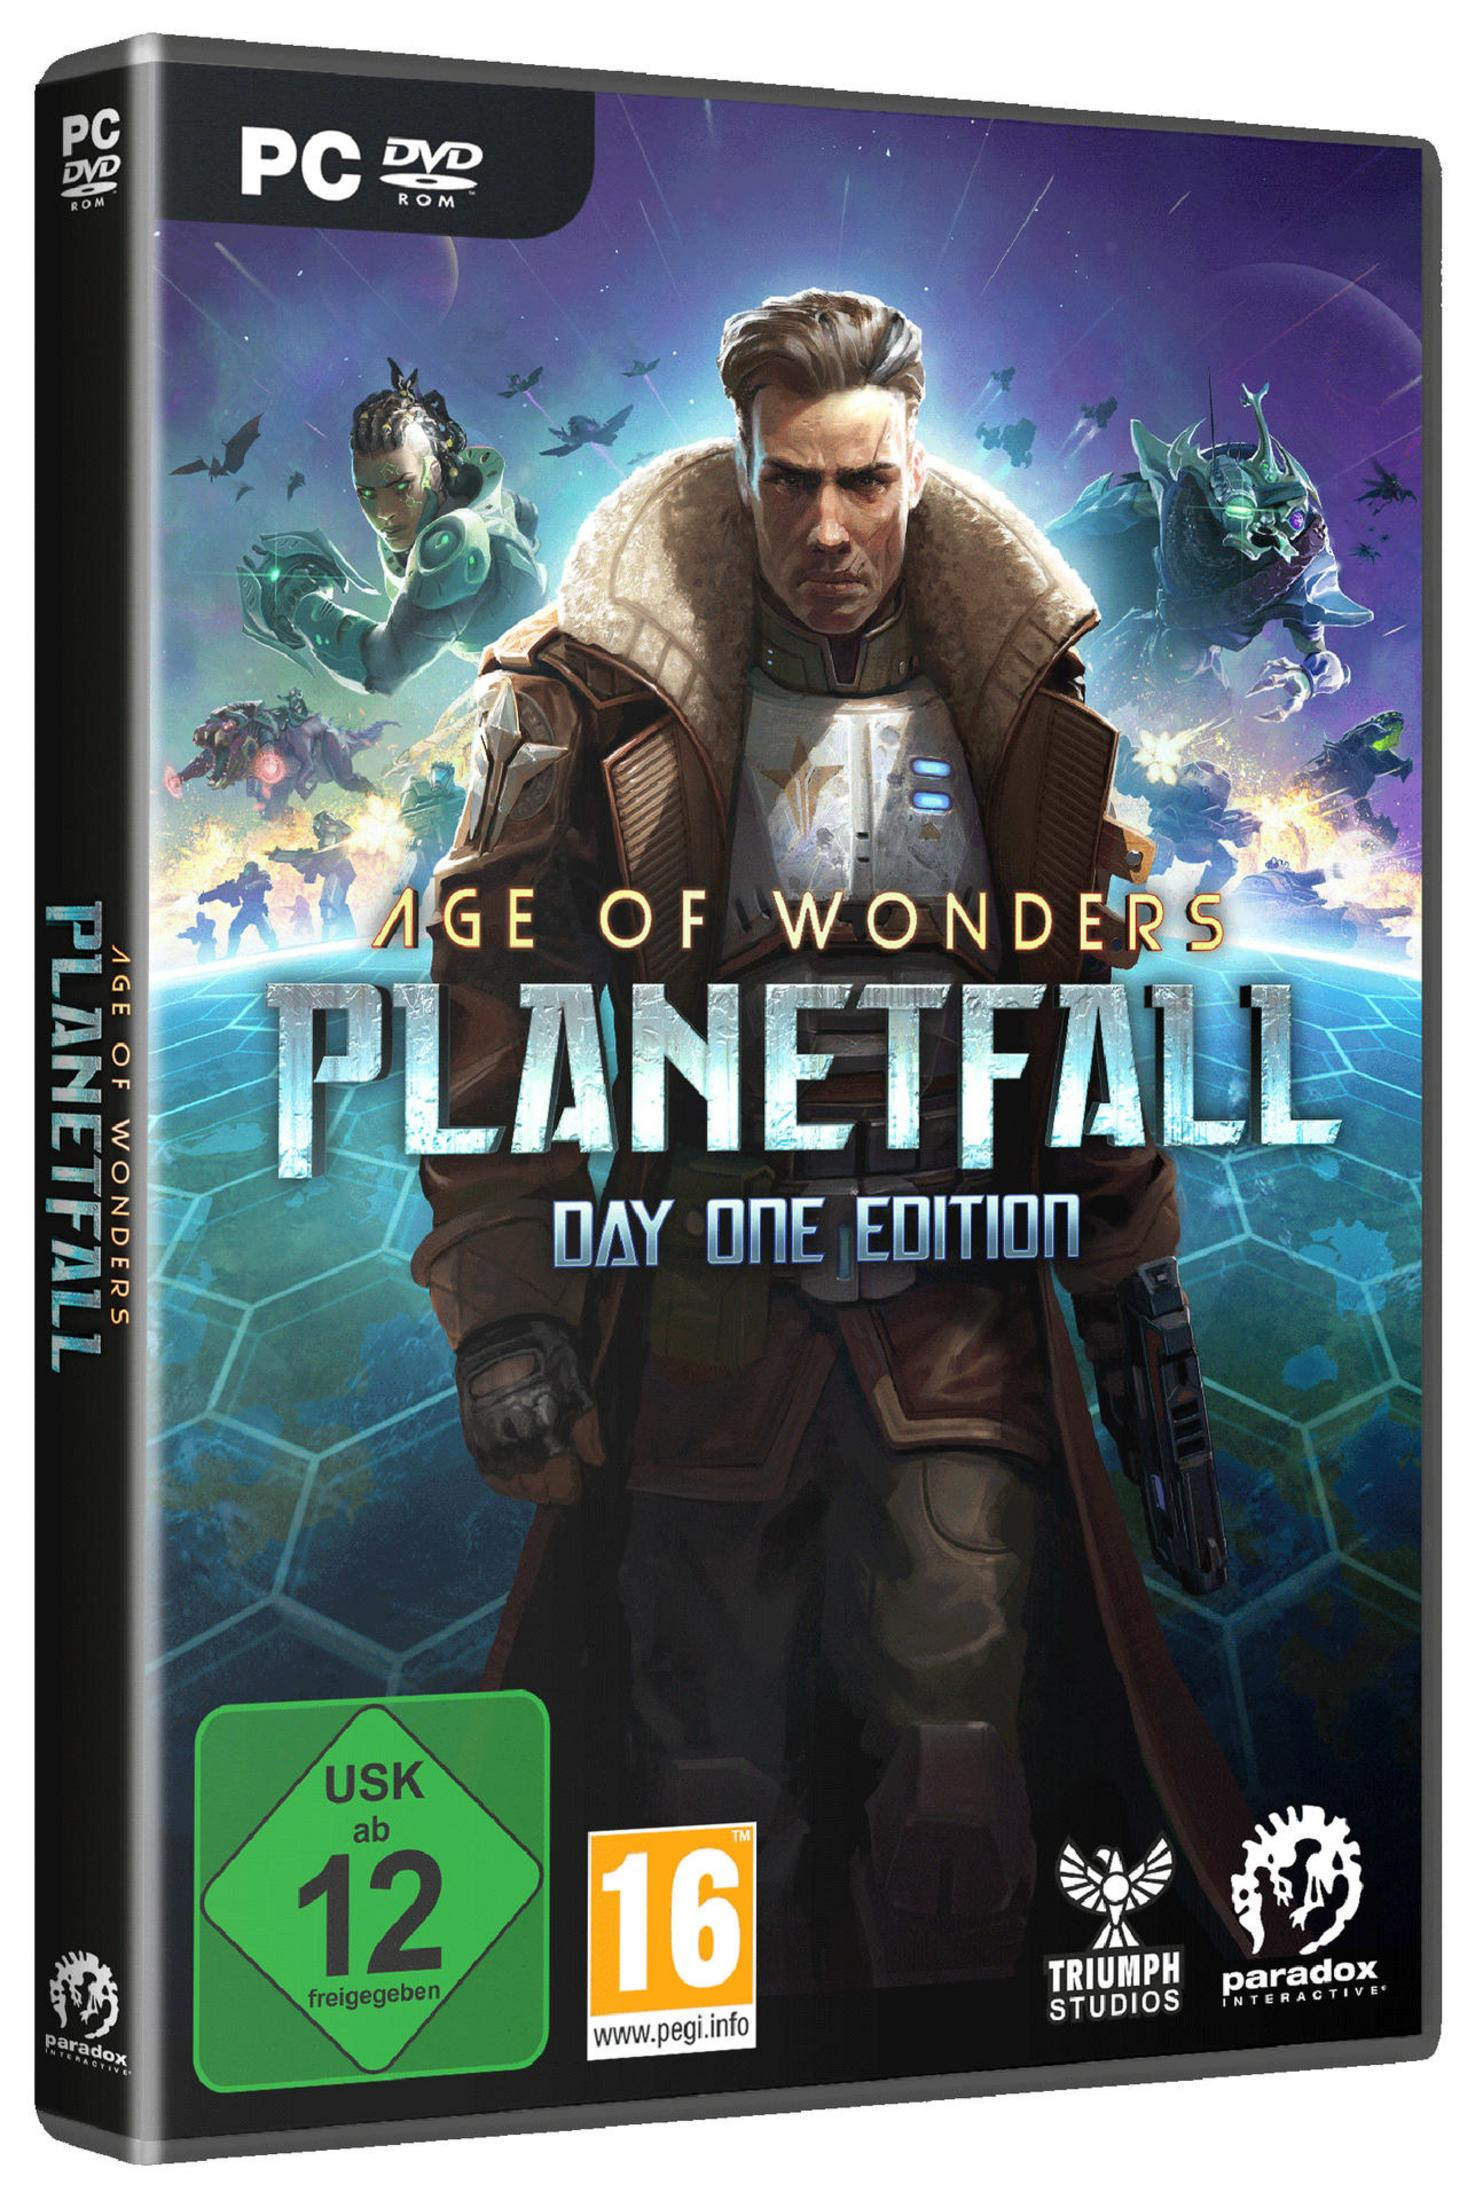 [PC] Edition Age One Planetfall Wonders: Day of -